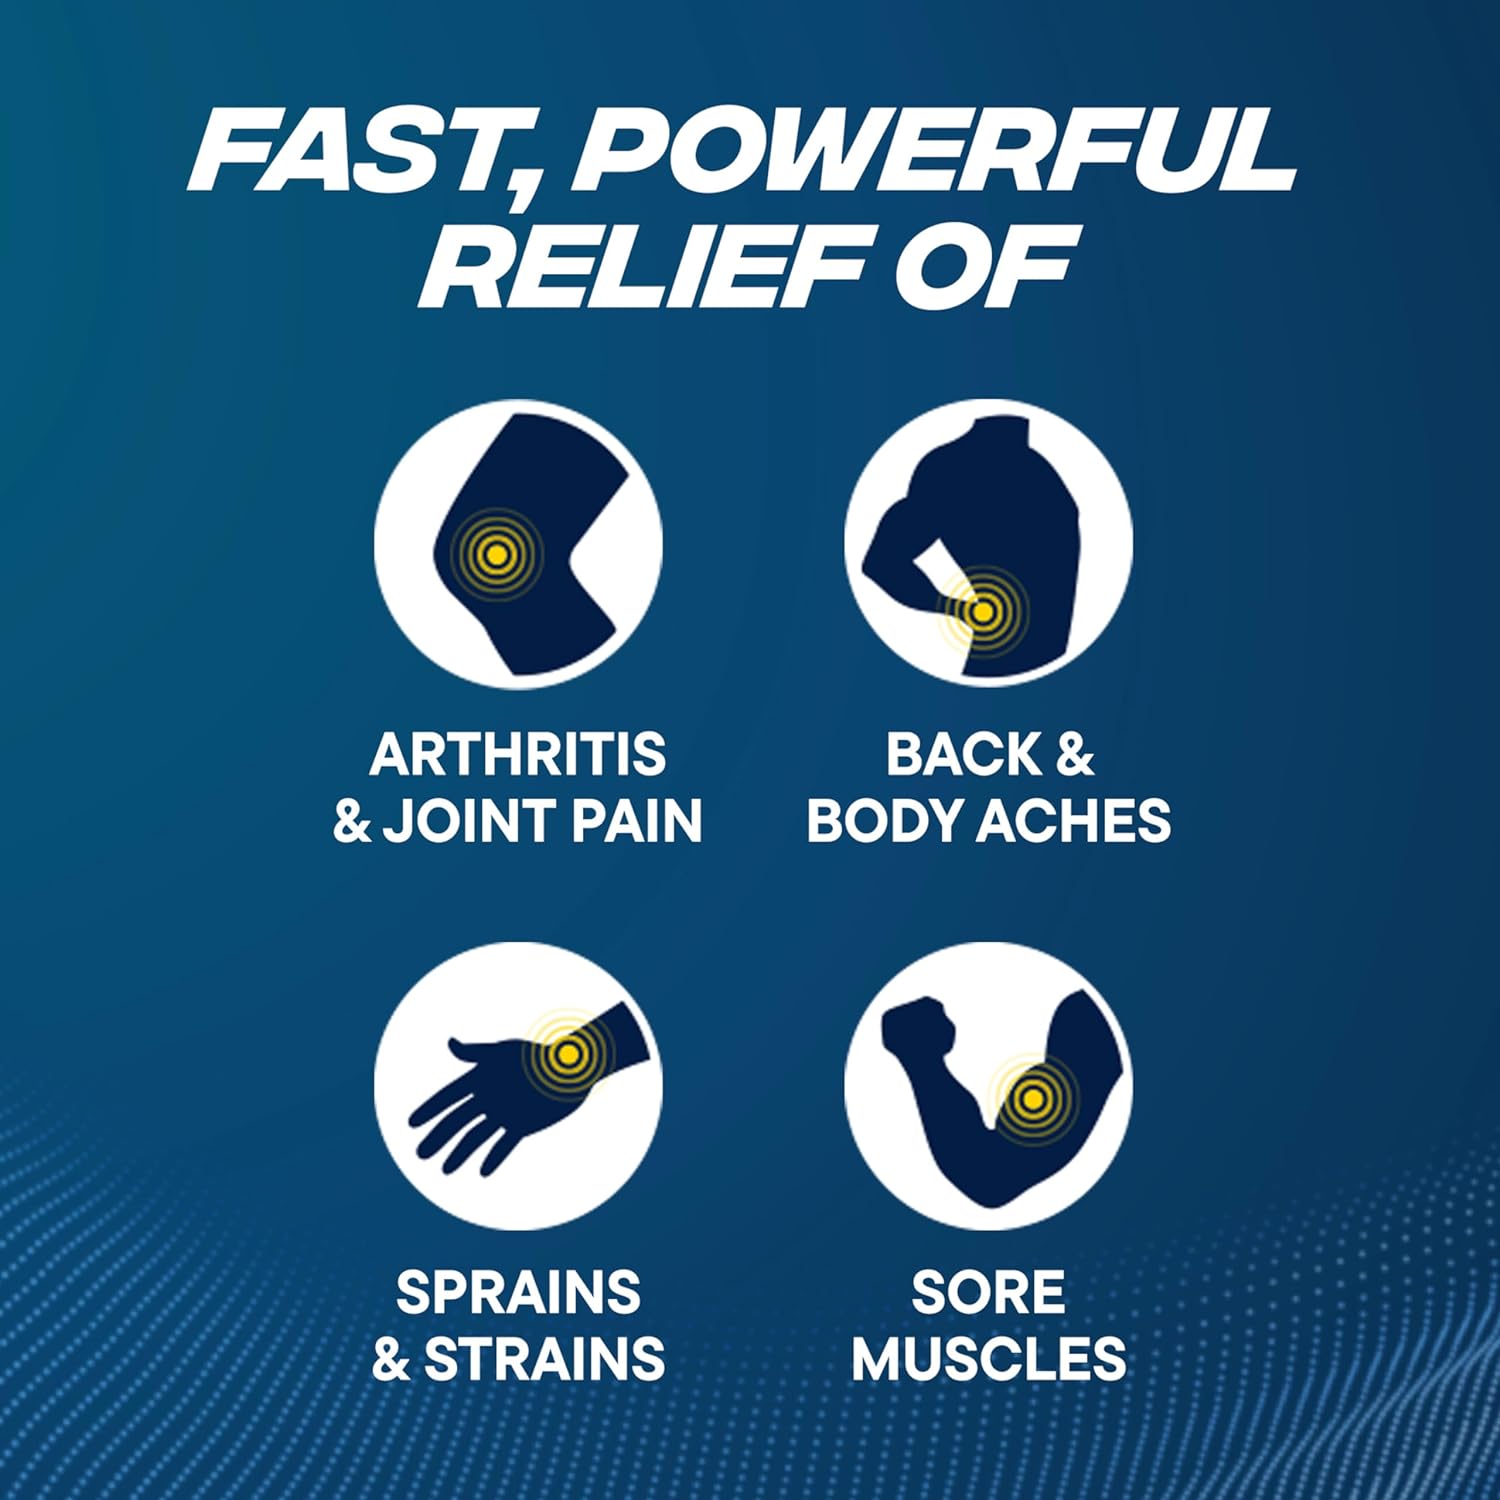 Advil Targeted Relief Pain Relieving Cream with Massage Applicator, Up to 8 Hours of Powerful Relief of Joint Pain, Lower Back Pain and Muscle Pain, 2.5 oz : Health & Household